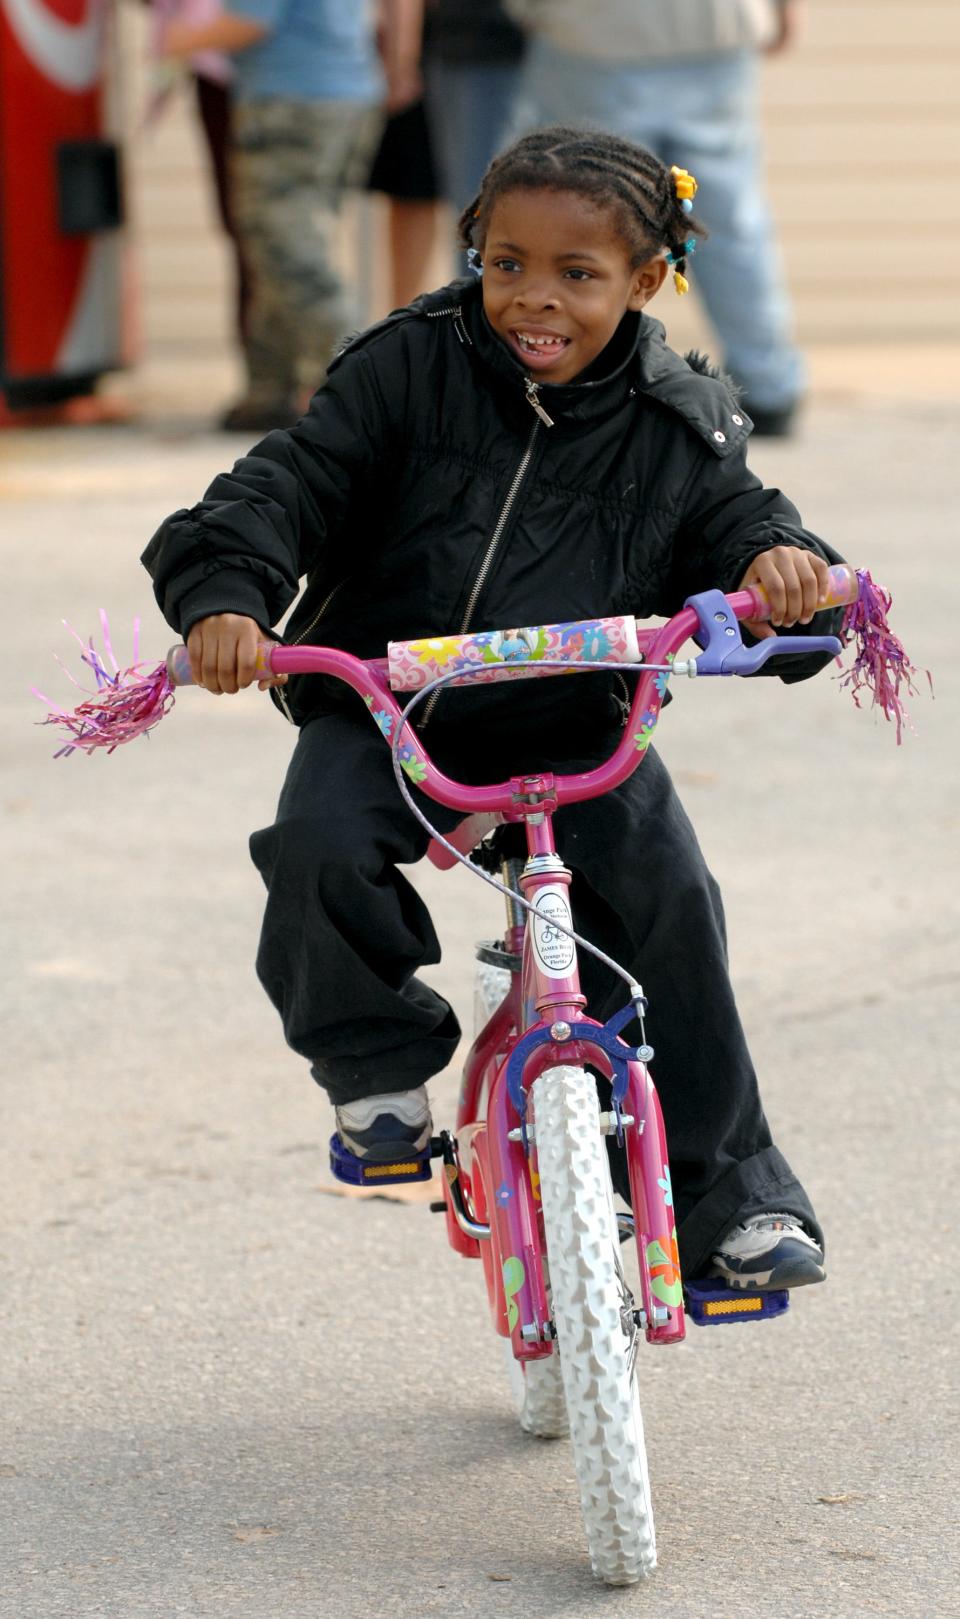 Larickya Cummings, 6, rides her new bike away from the 25th annual J.P. Hall Christmas Party in 2006. There were around 500 new and refurbished bikes donated by several groups to be given away at the Clay County charity event.